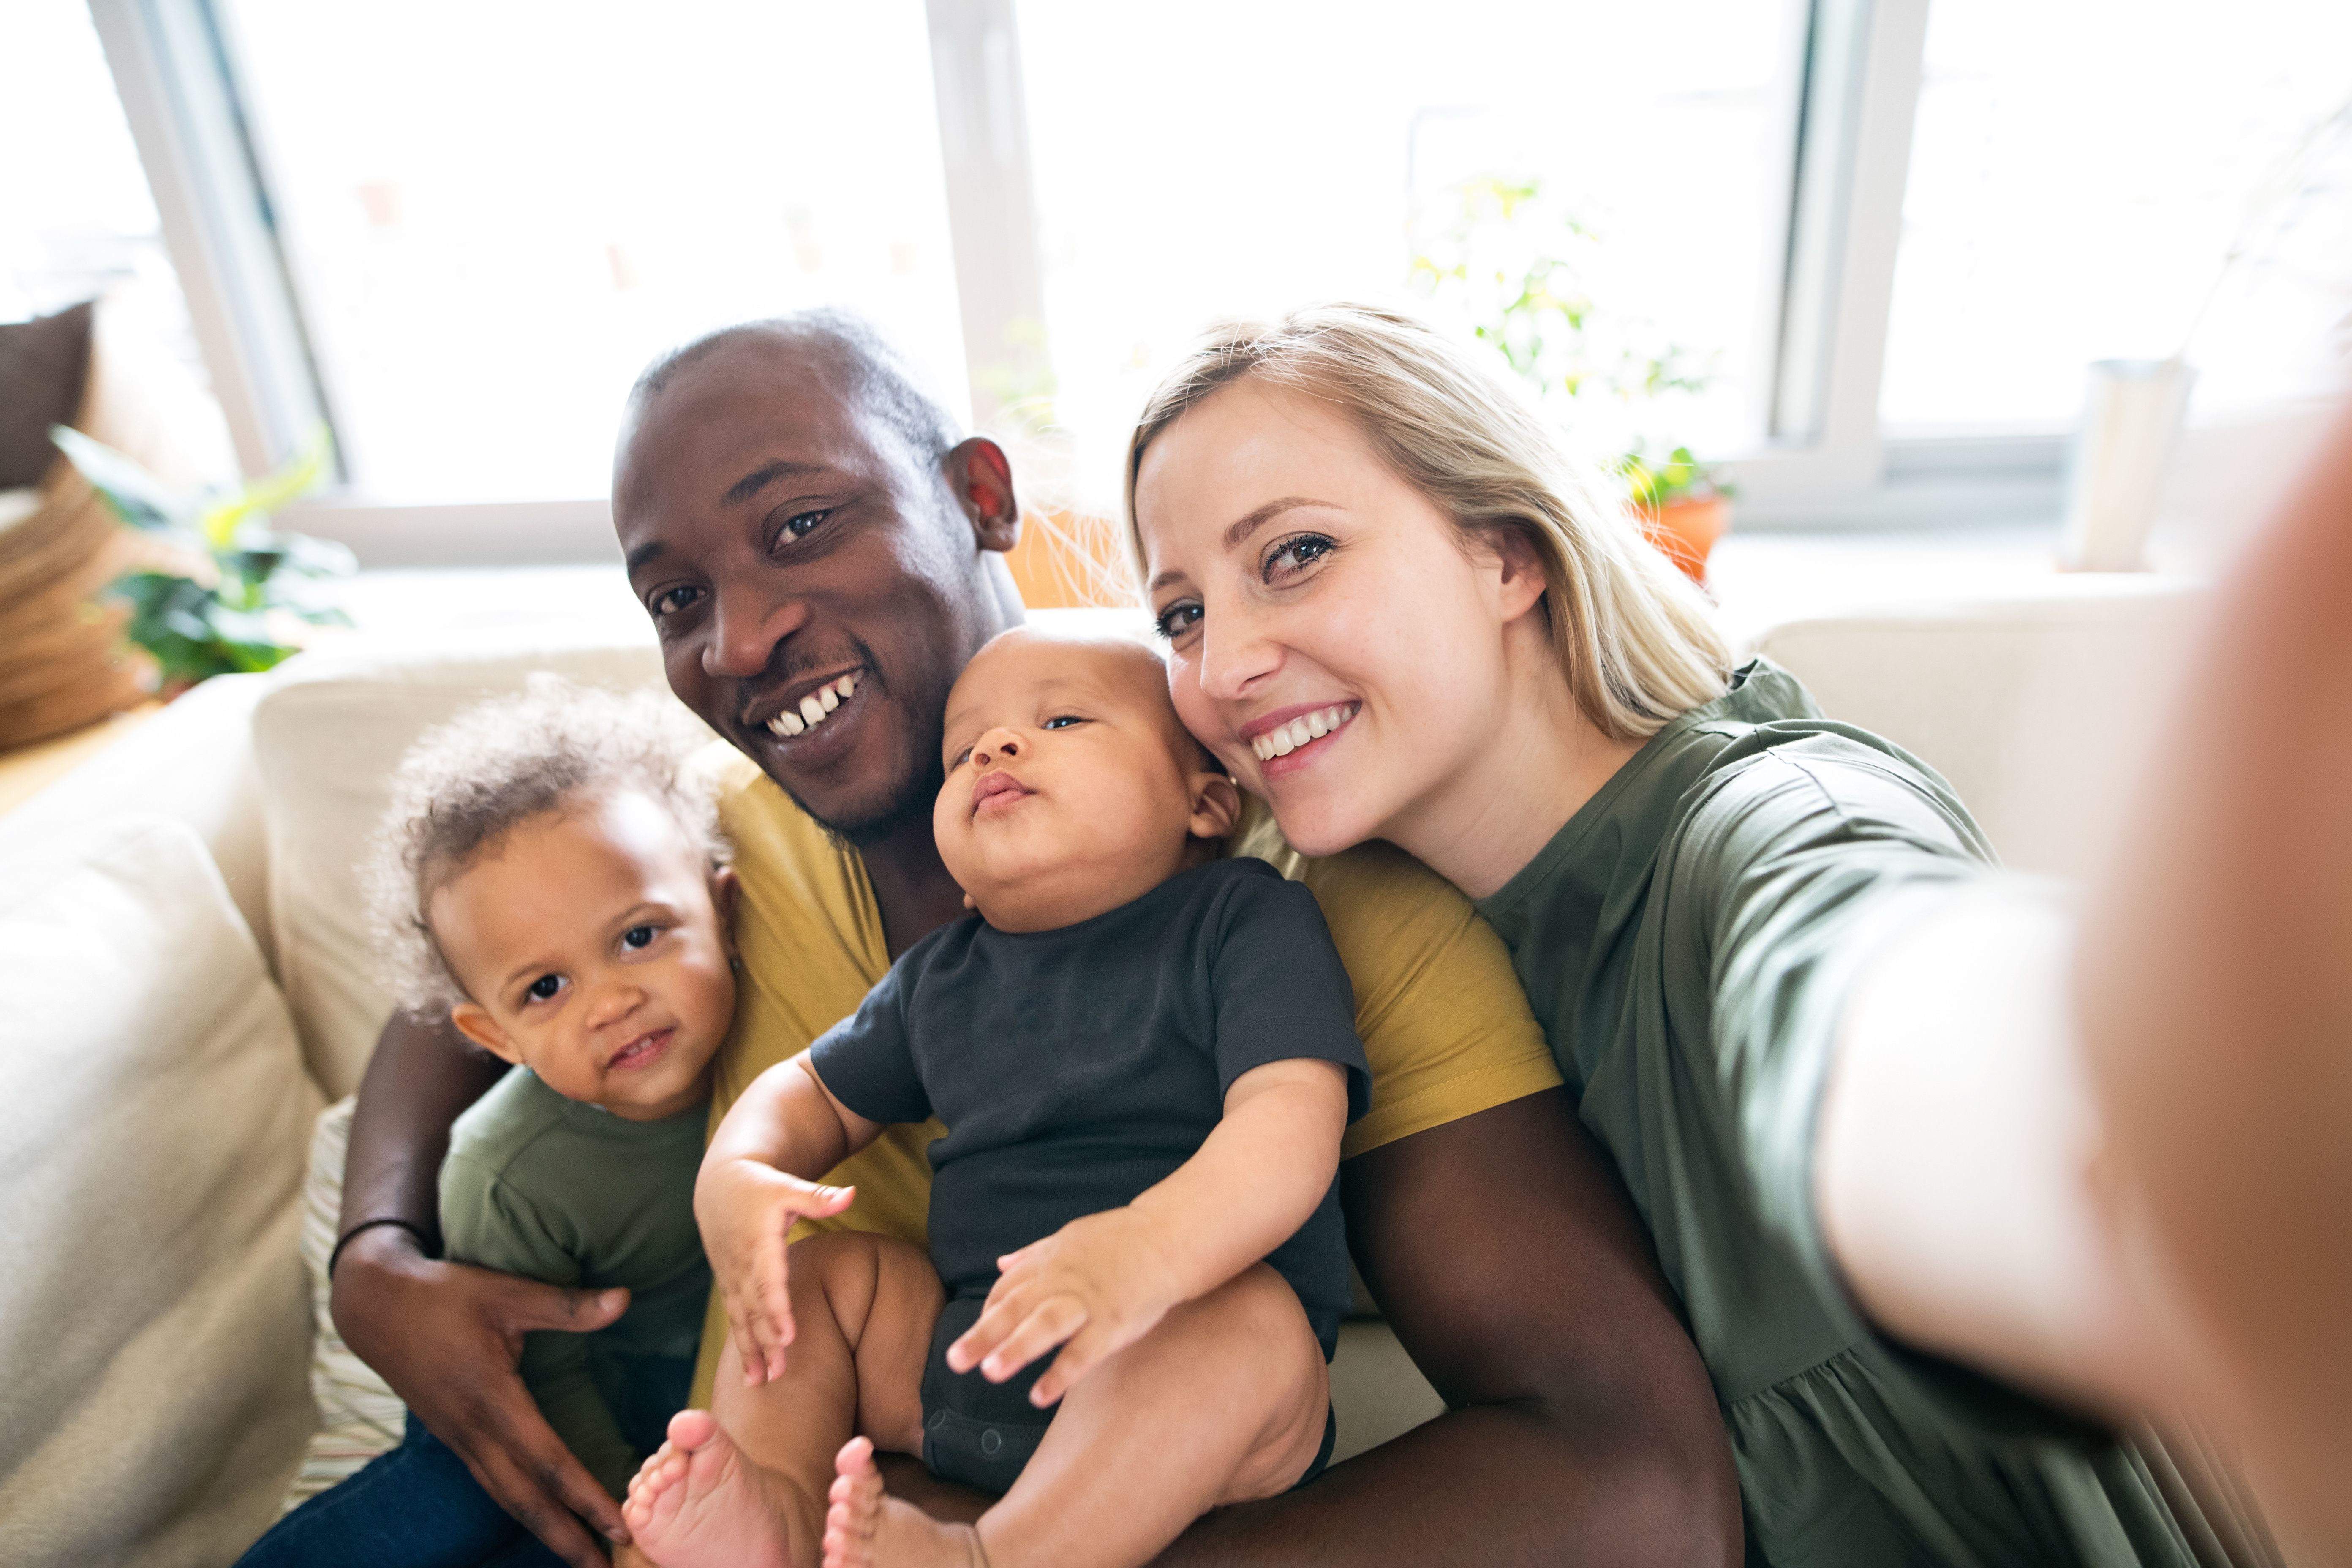 HB22-1289 Health Benefits for Colorado Children and Pregnant Persons